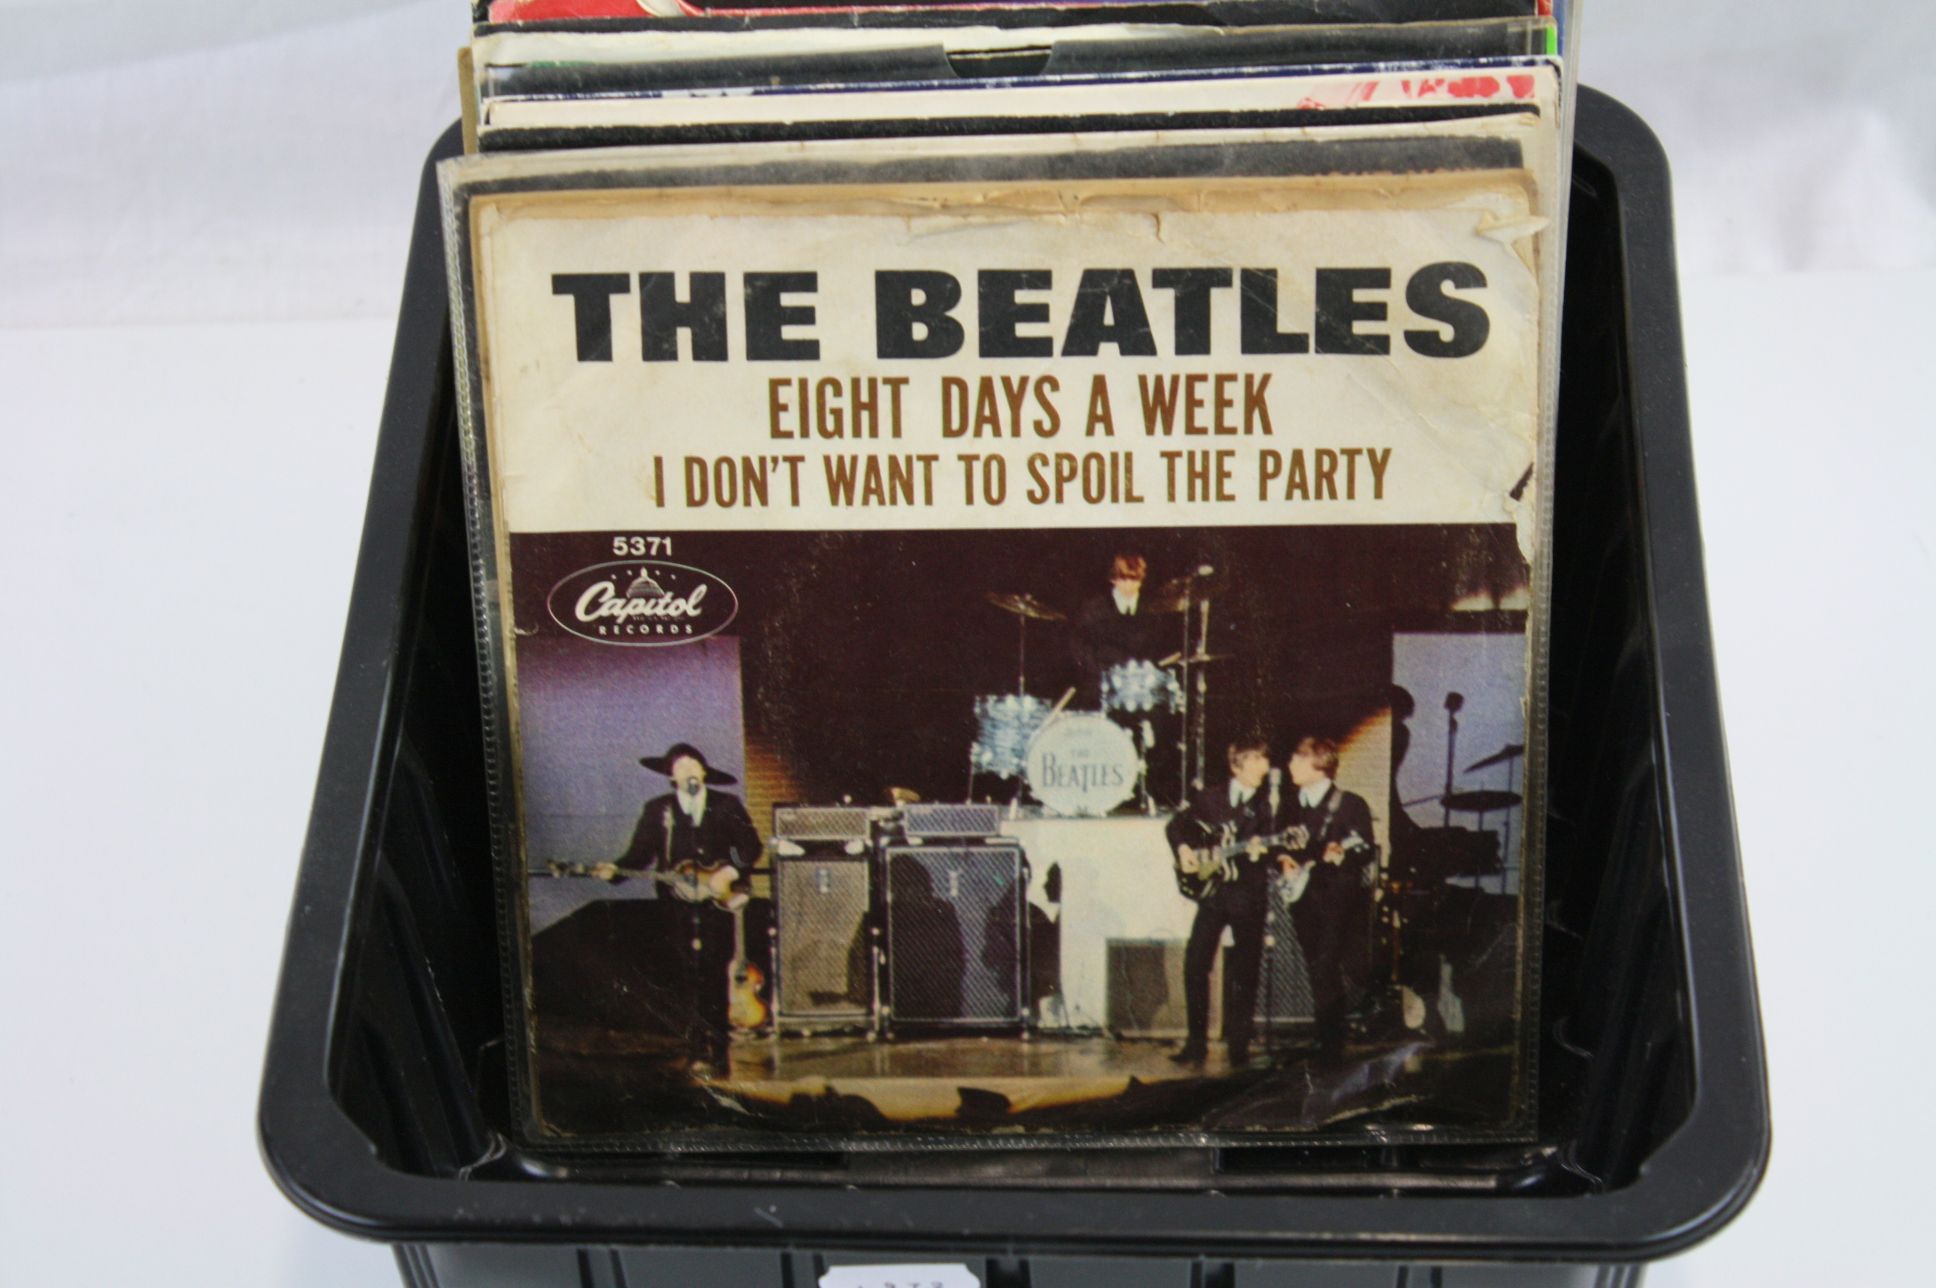 Vinyl - Collection of over 50 rock and pop 45's & EP's including The Beatles, The Move, The - Image 7 of 12